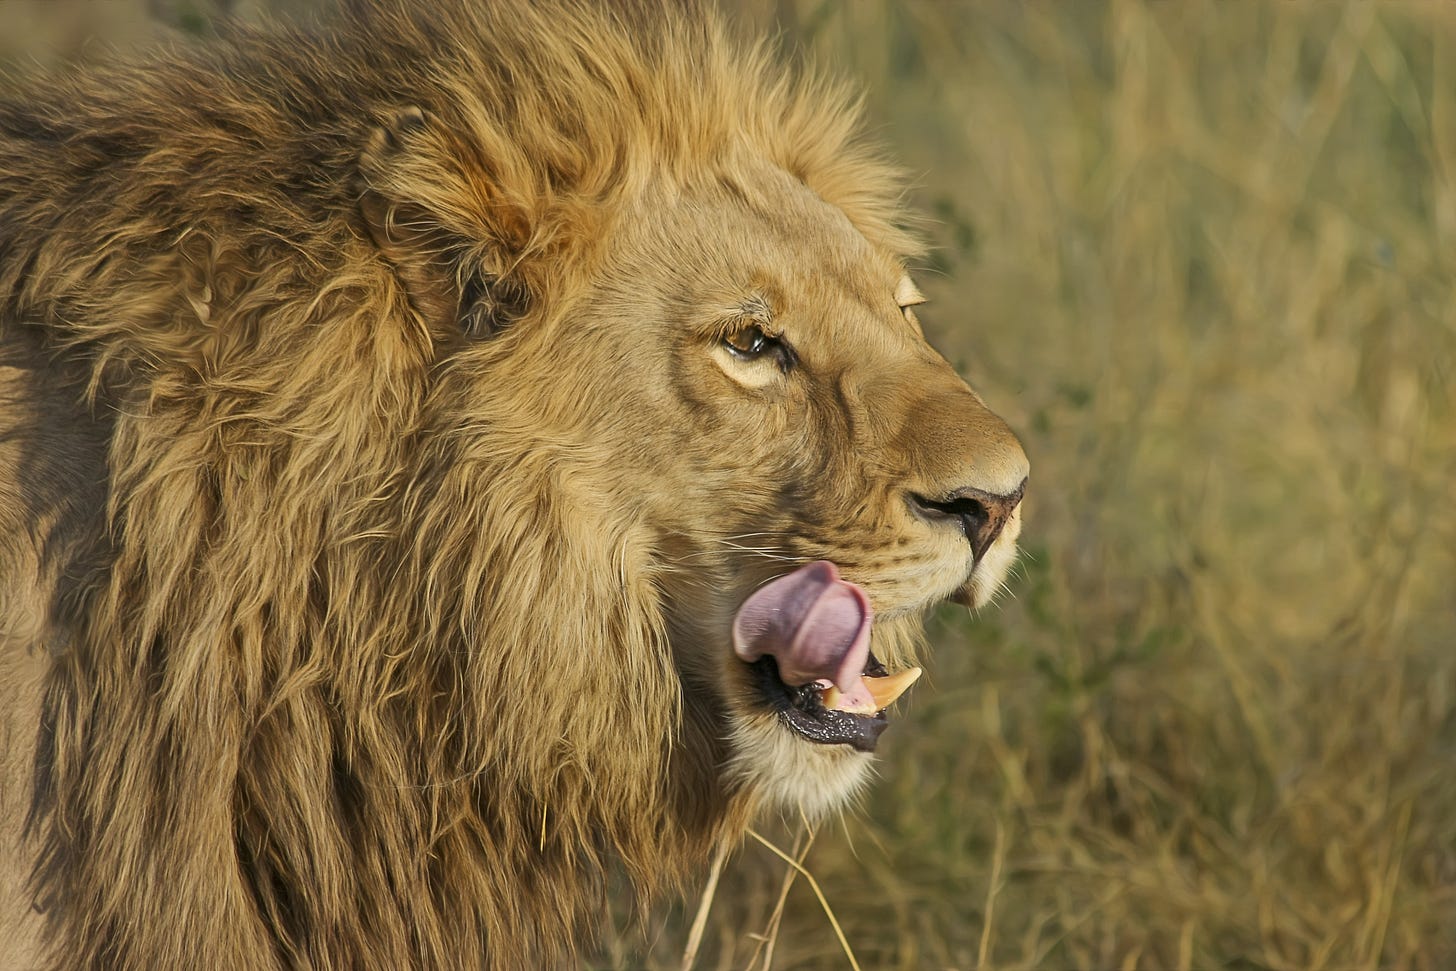 A lion walking through the grass and licking his lips.